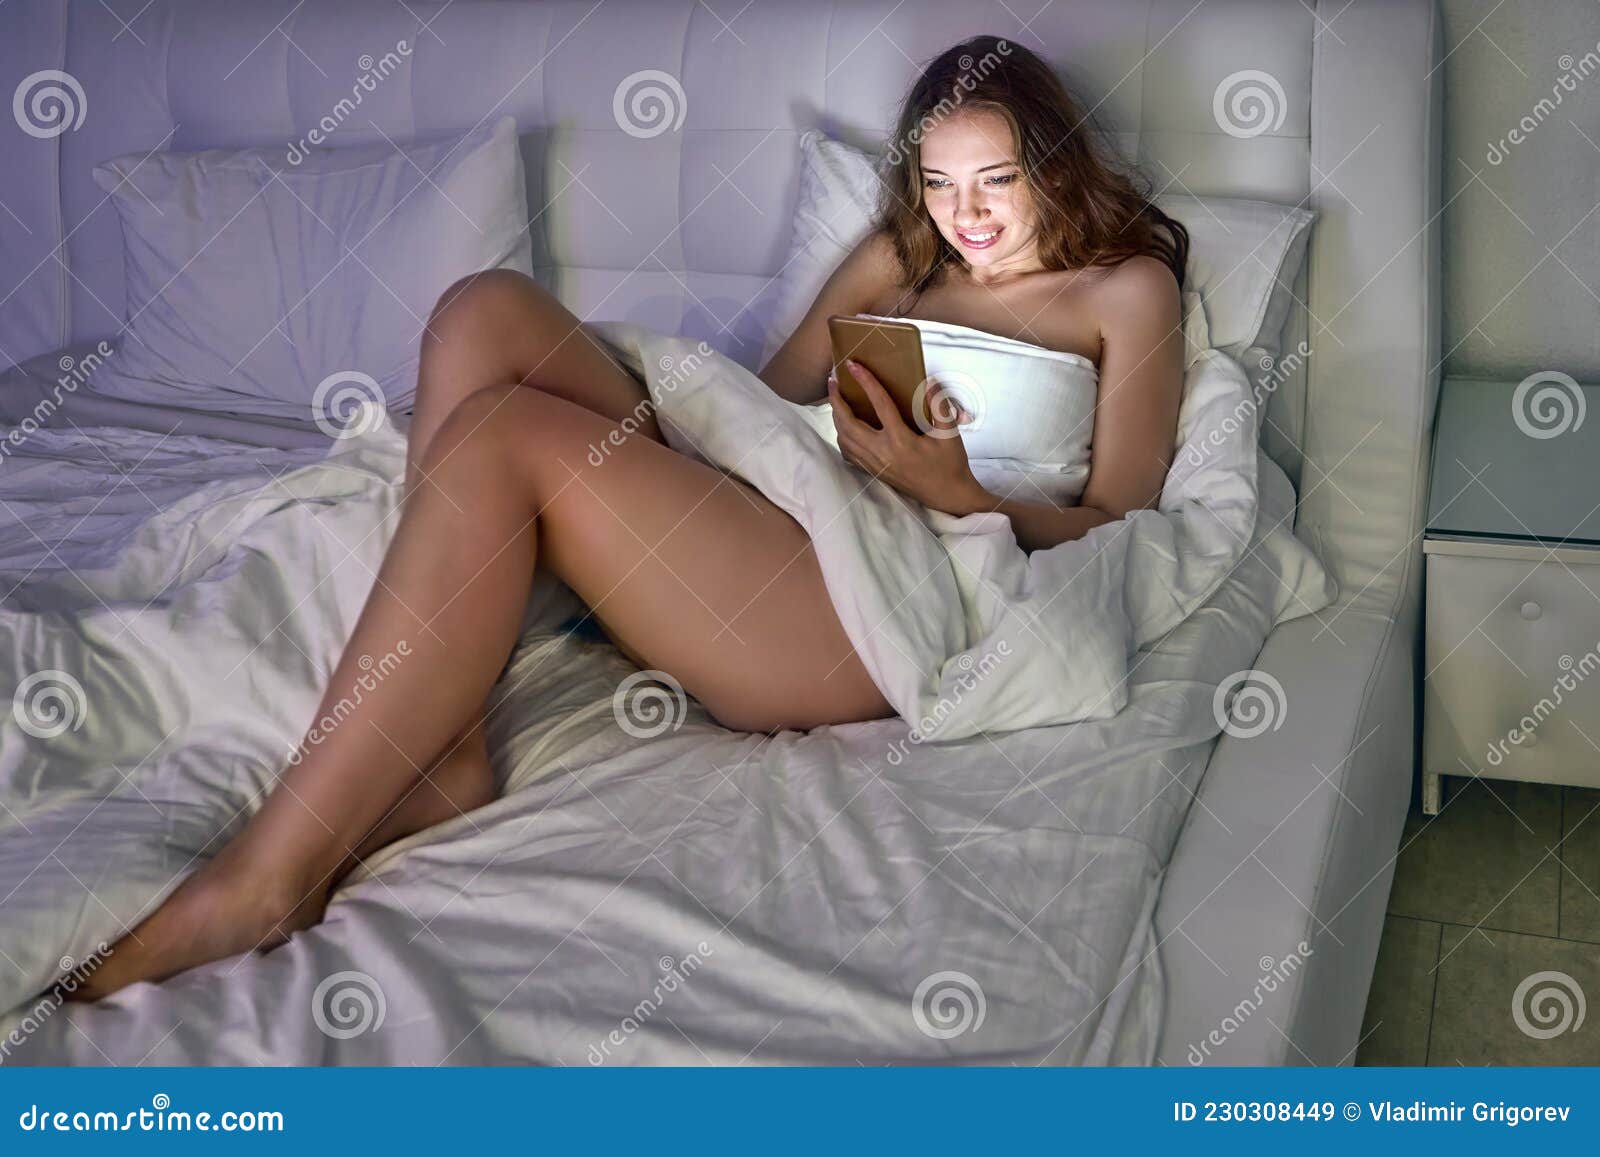 Happy Naked Woman Lies in Bed with Smartphone and Chatting with Friends